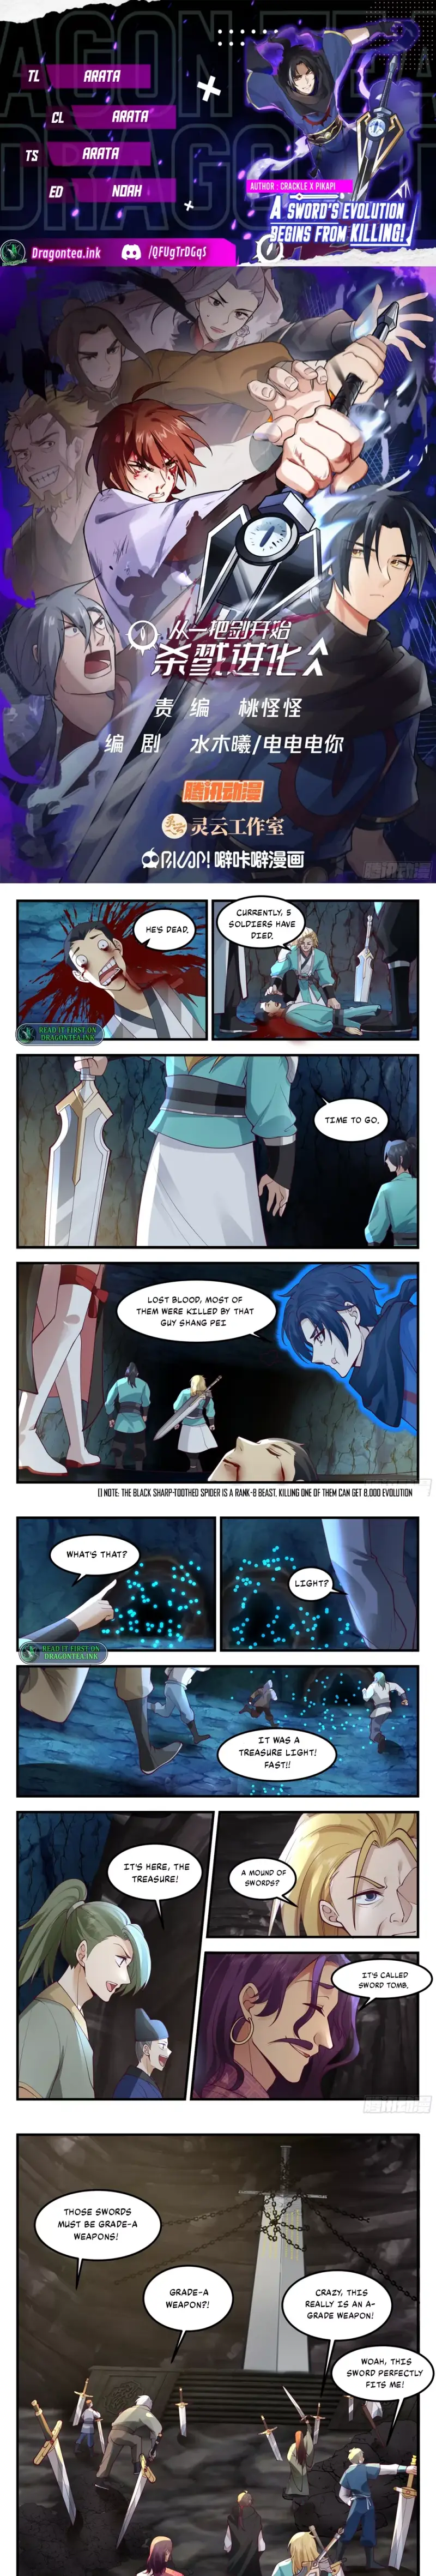 Killing Evolution From A Sword - Page 1